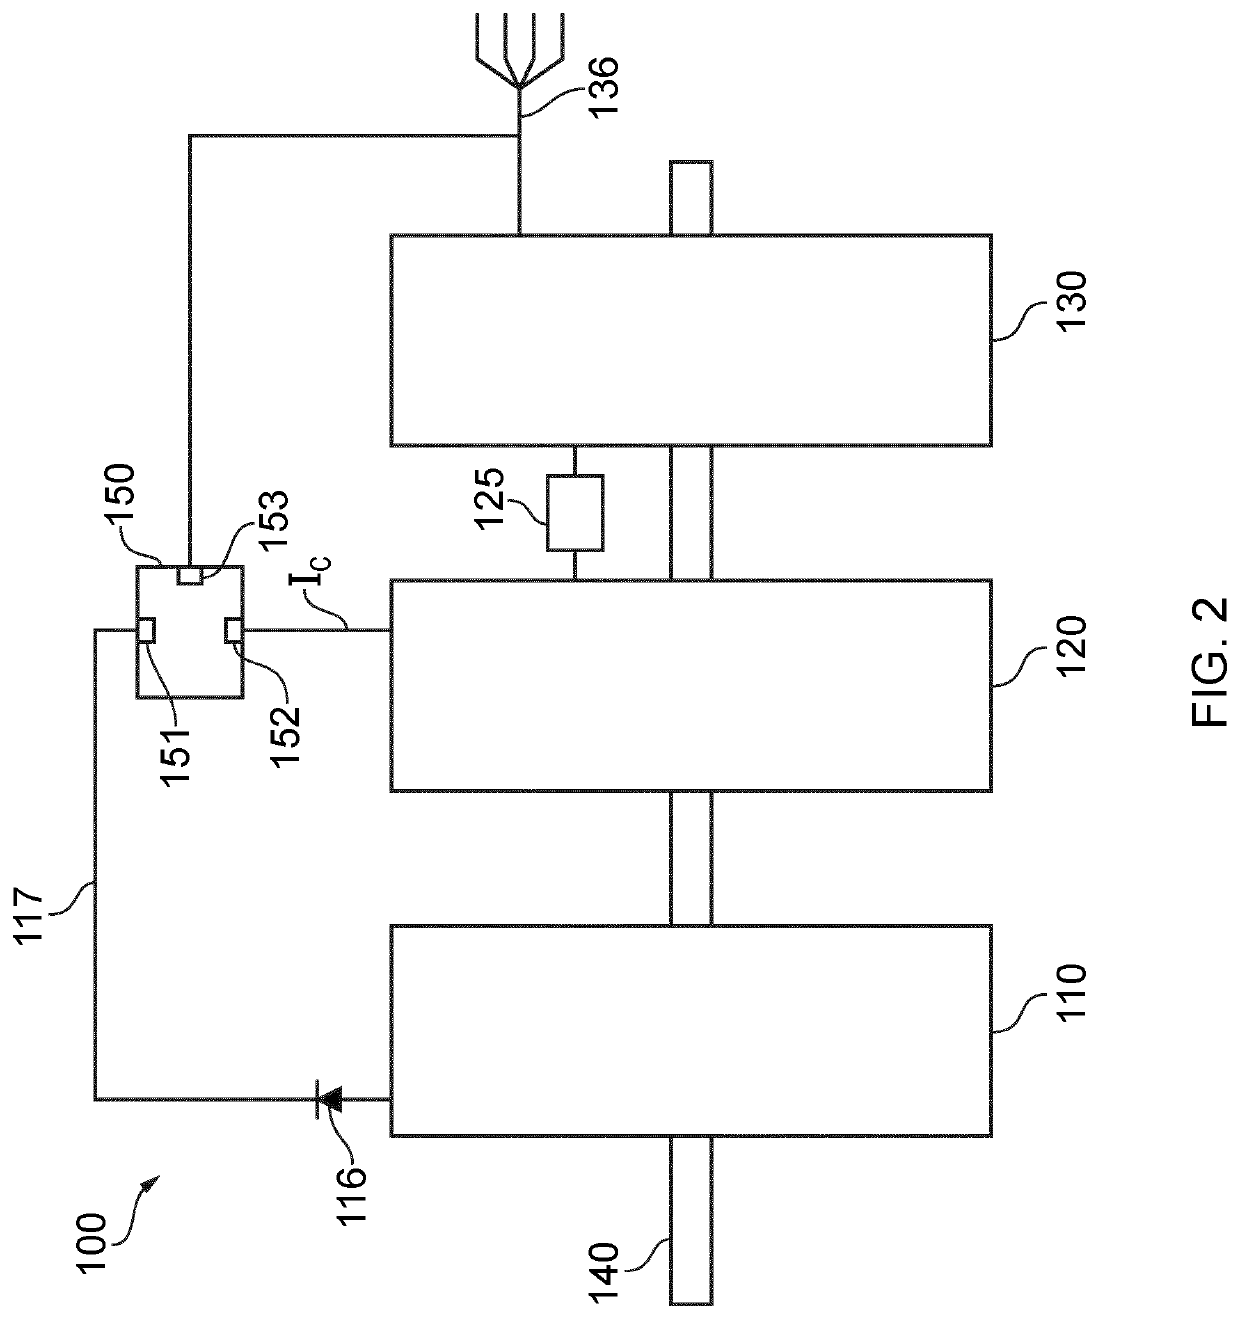 Multi-stage synchronous generator